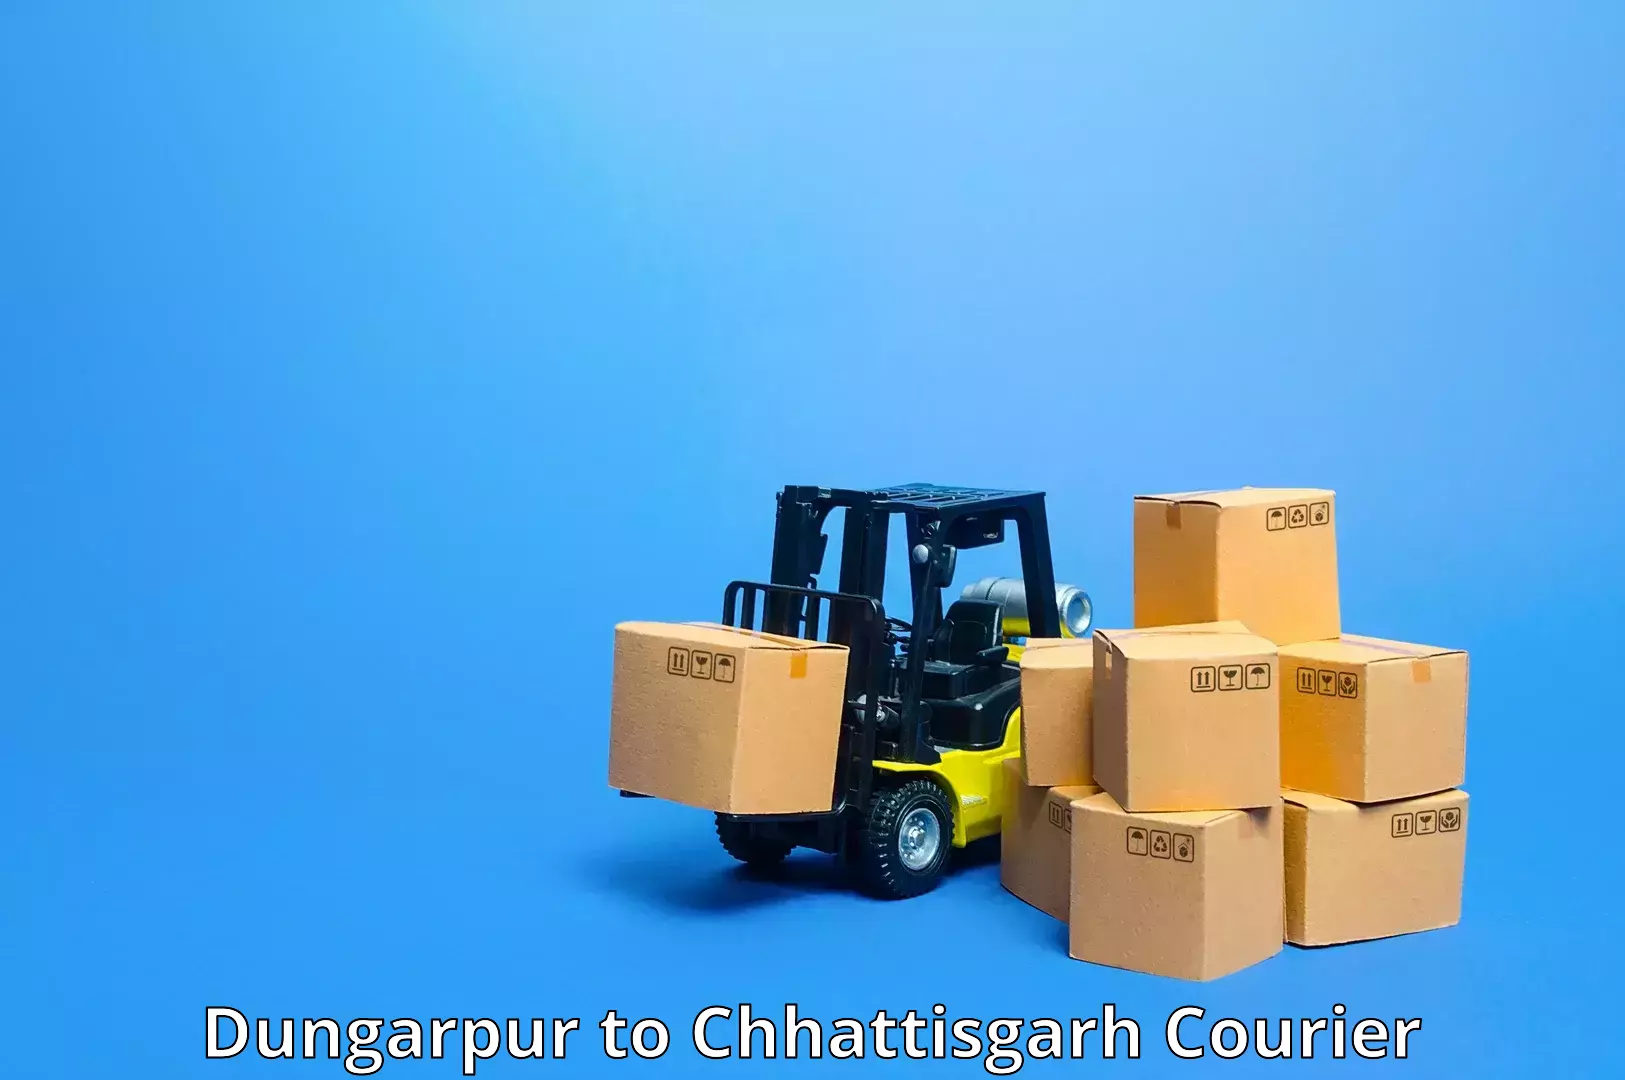 Reliable courier service Dungarpur to Mahasamund